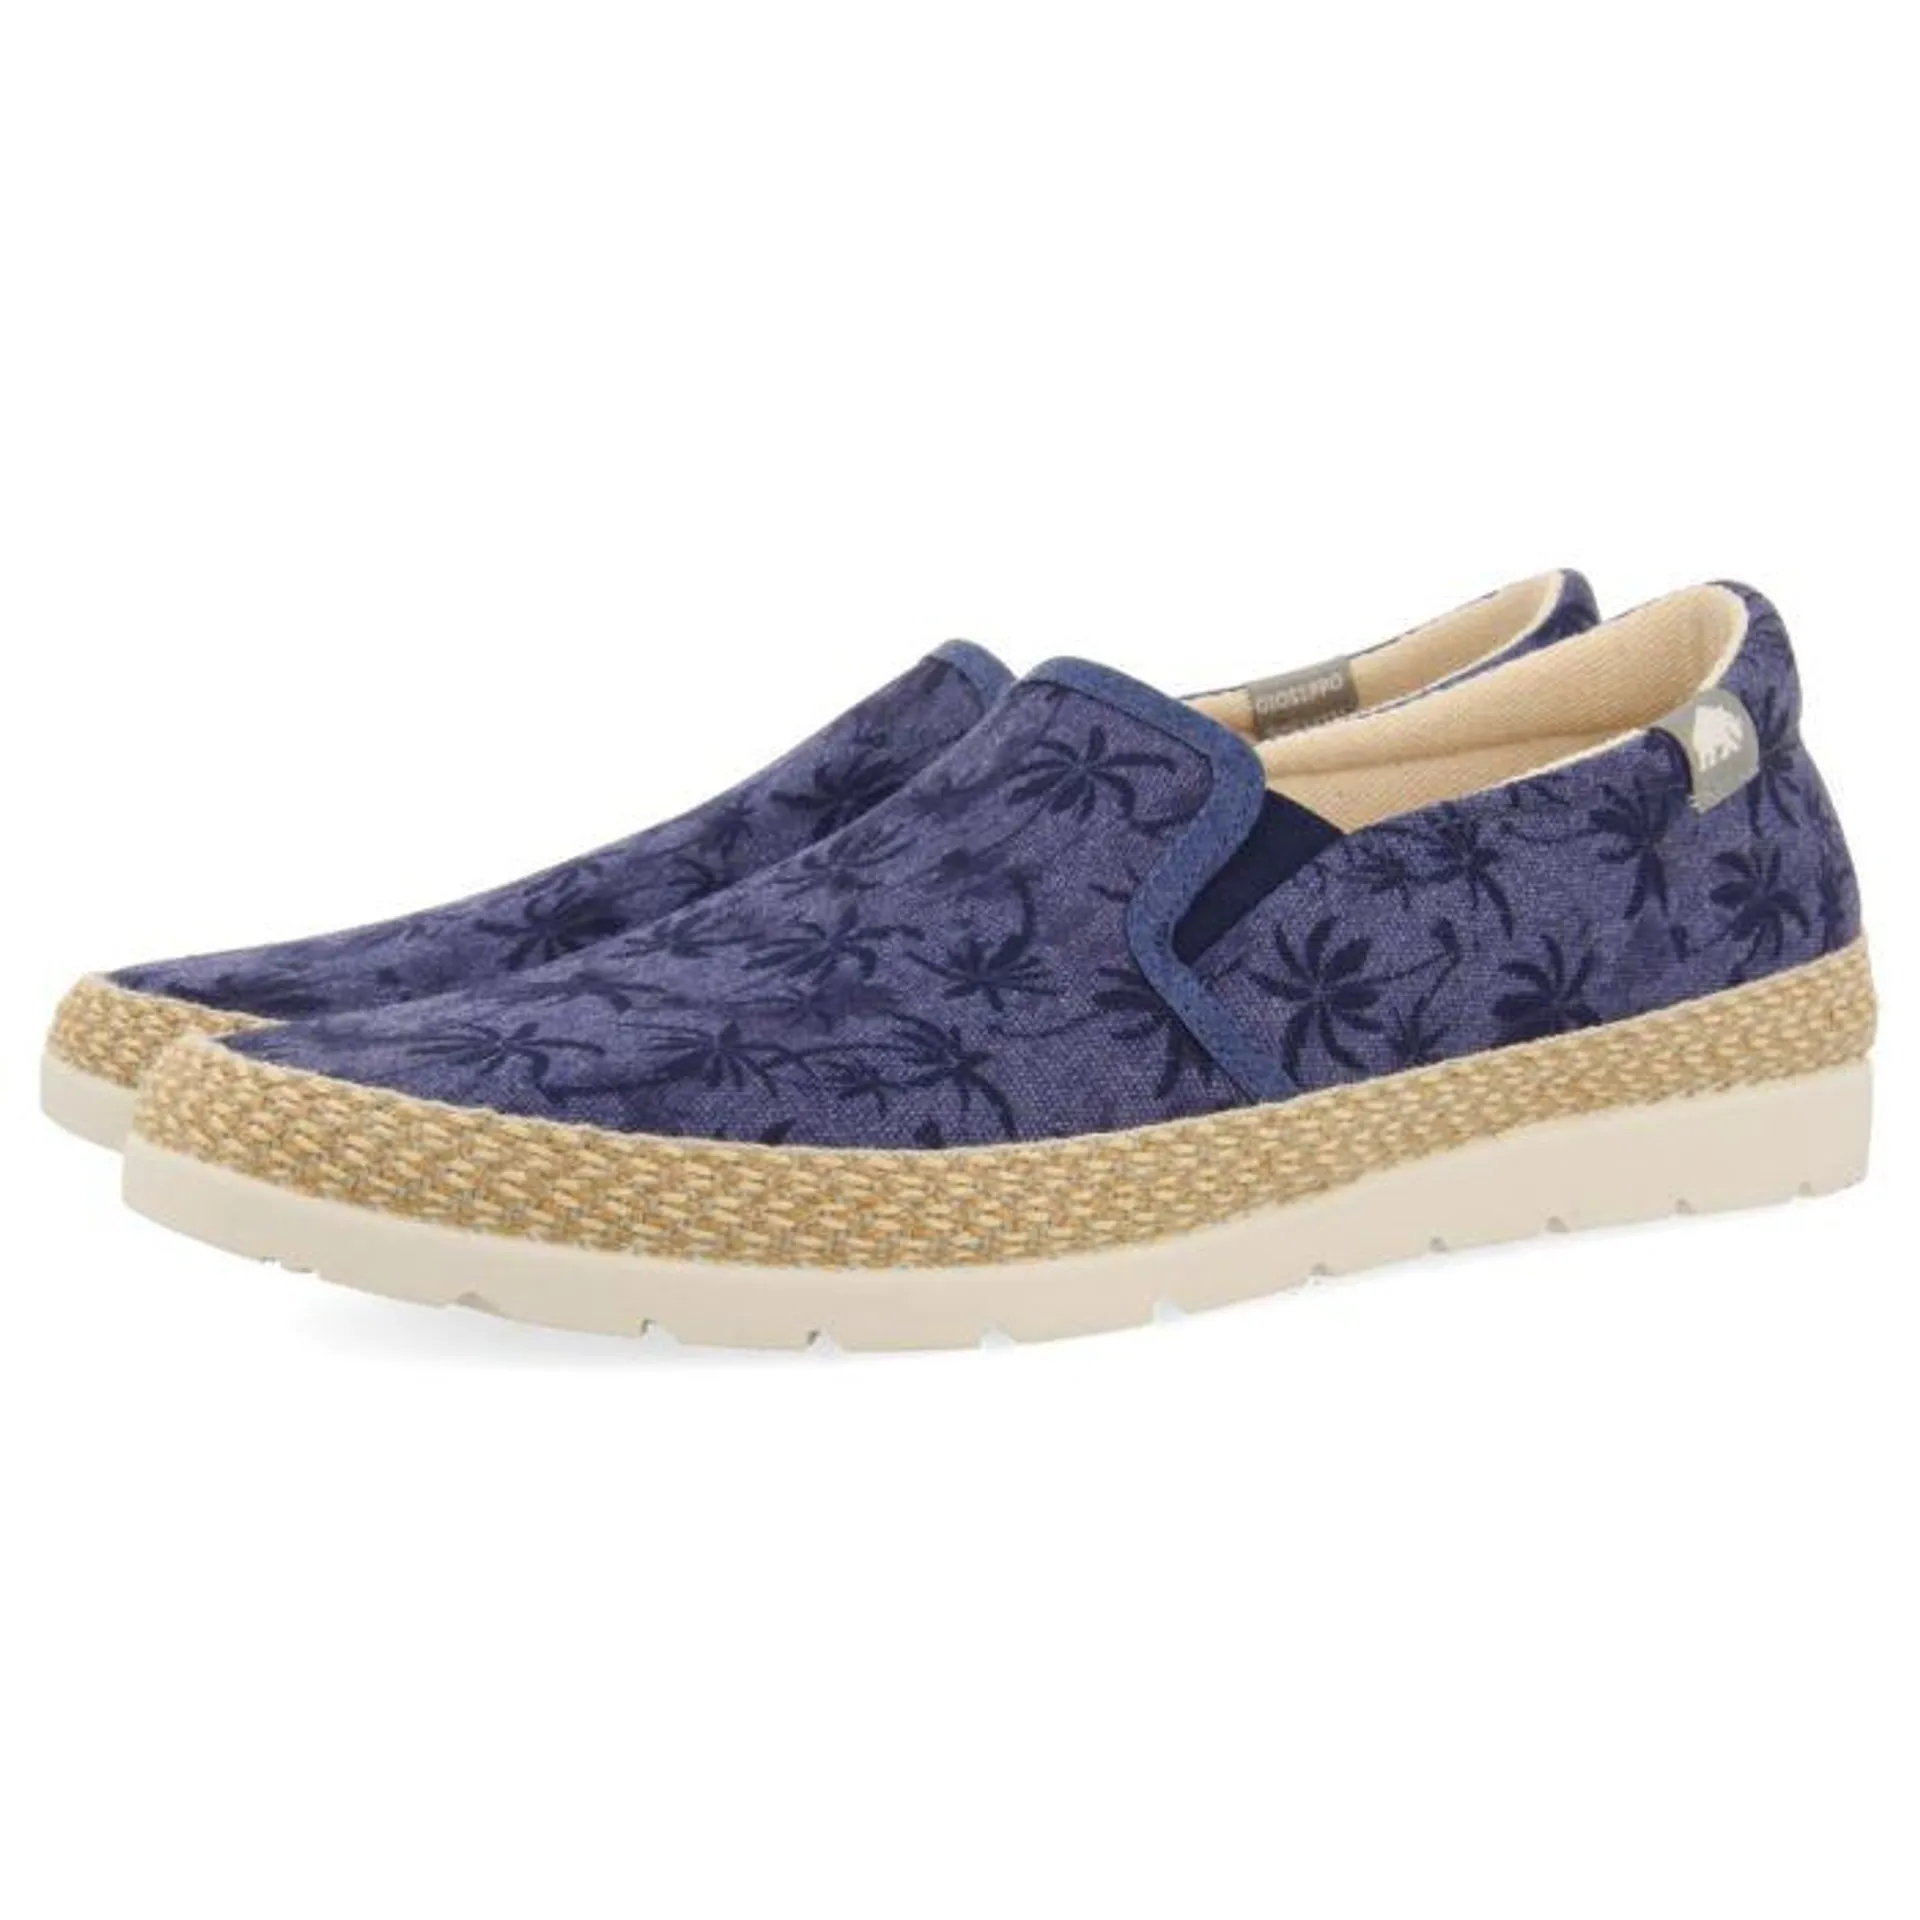 NAVY BLUE ESPADRILLES WITH PALM TREE PRINT AND RECYCLED COTTON FOR MEN SORTINO